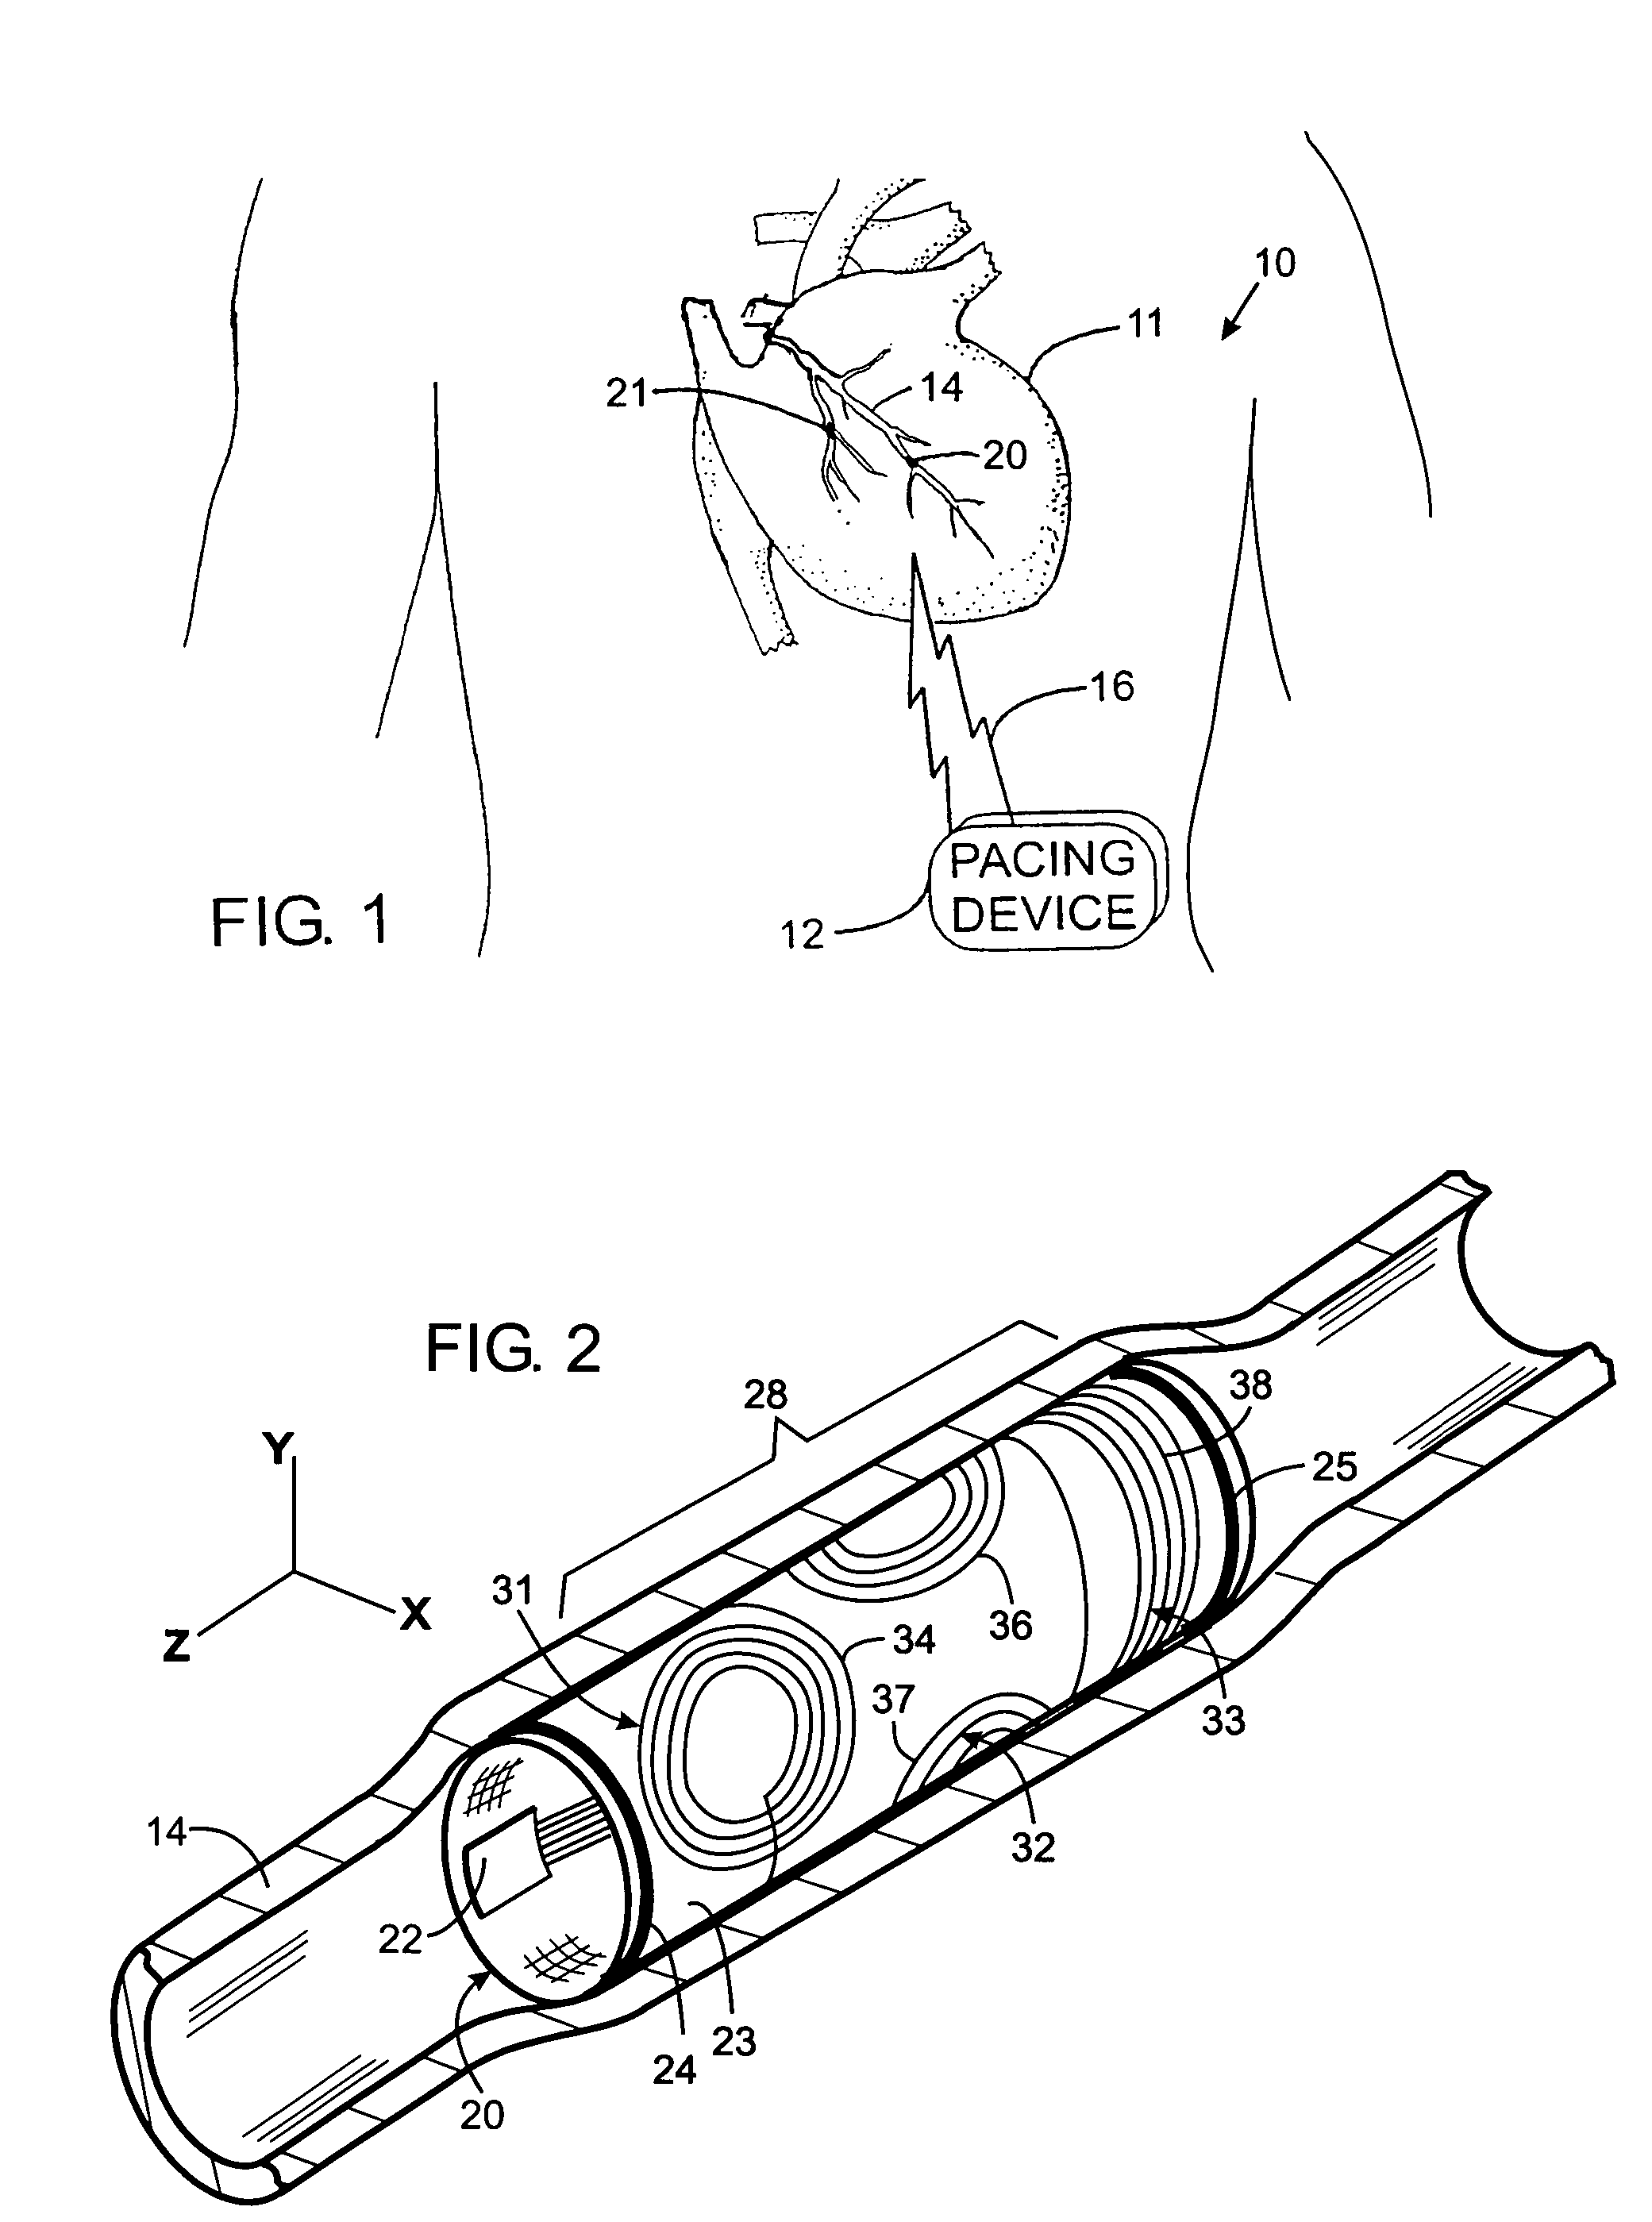 Implantable medical apparatus having an omnidirectional antenna for receiving radio frequency signals